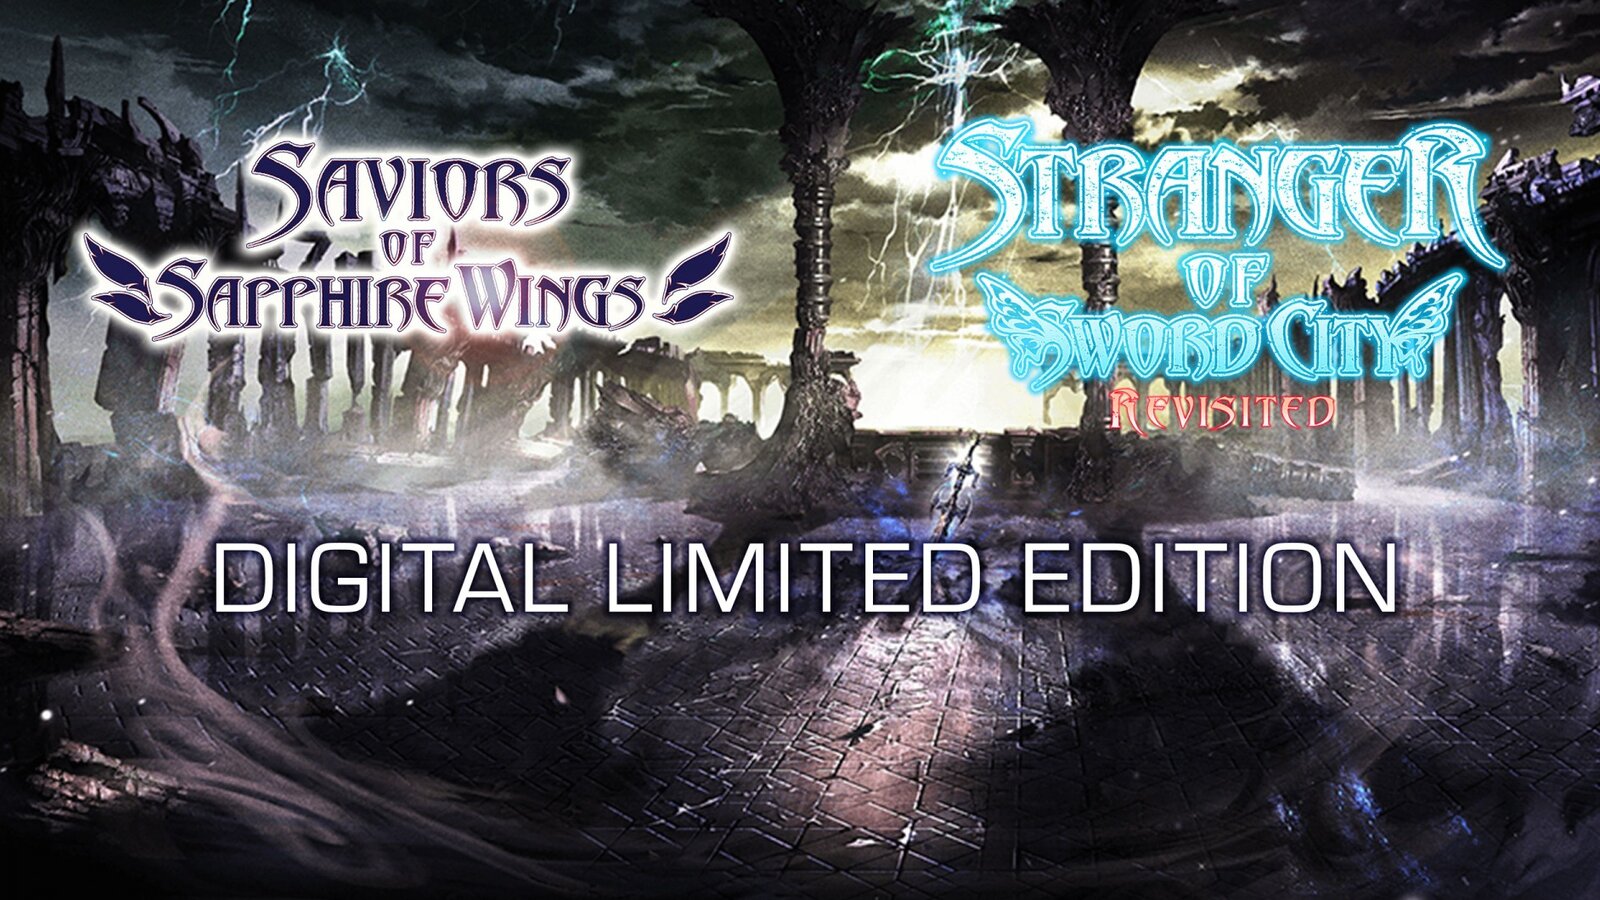 Saviors of Sapphire Wings & Stranger of Sword City Revisited - Digital Limited Edition